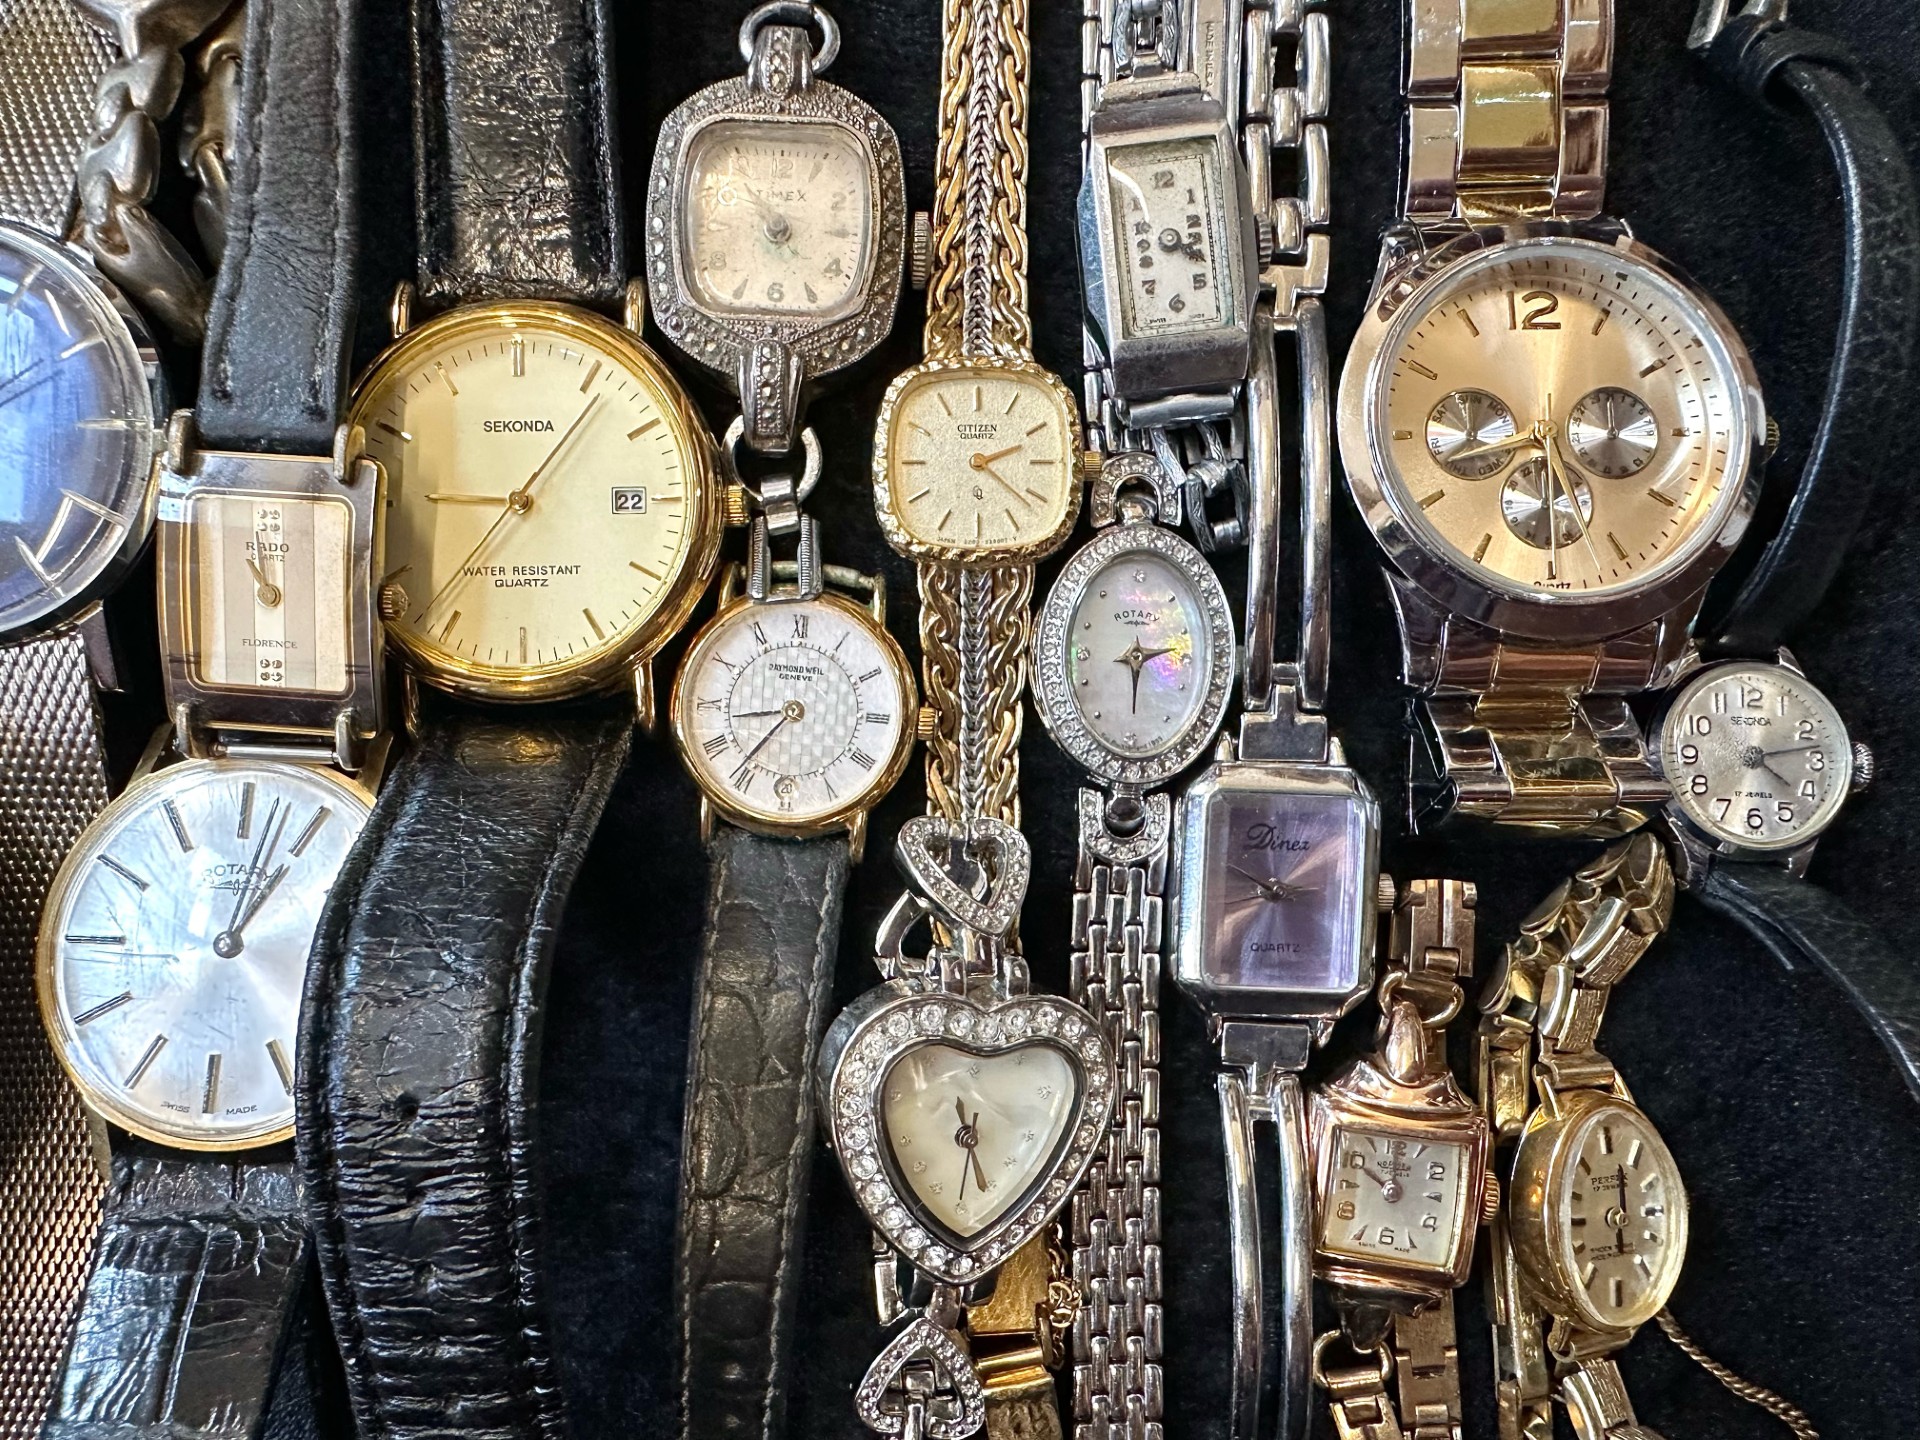 Collection of Ladies & Gentleman's Wristwatches, leather and bracelet straps, makes include Sekonda, - Image 3 of 3